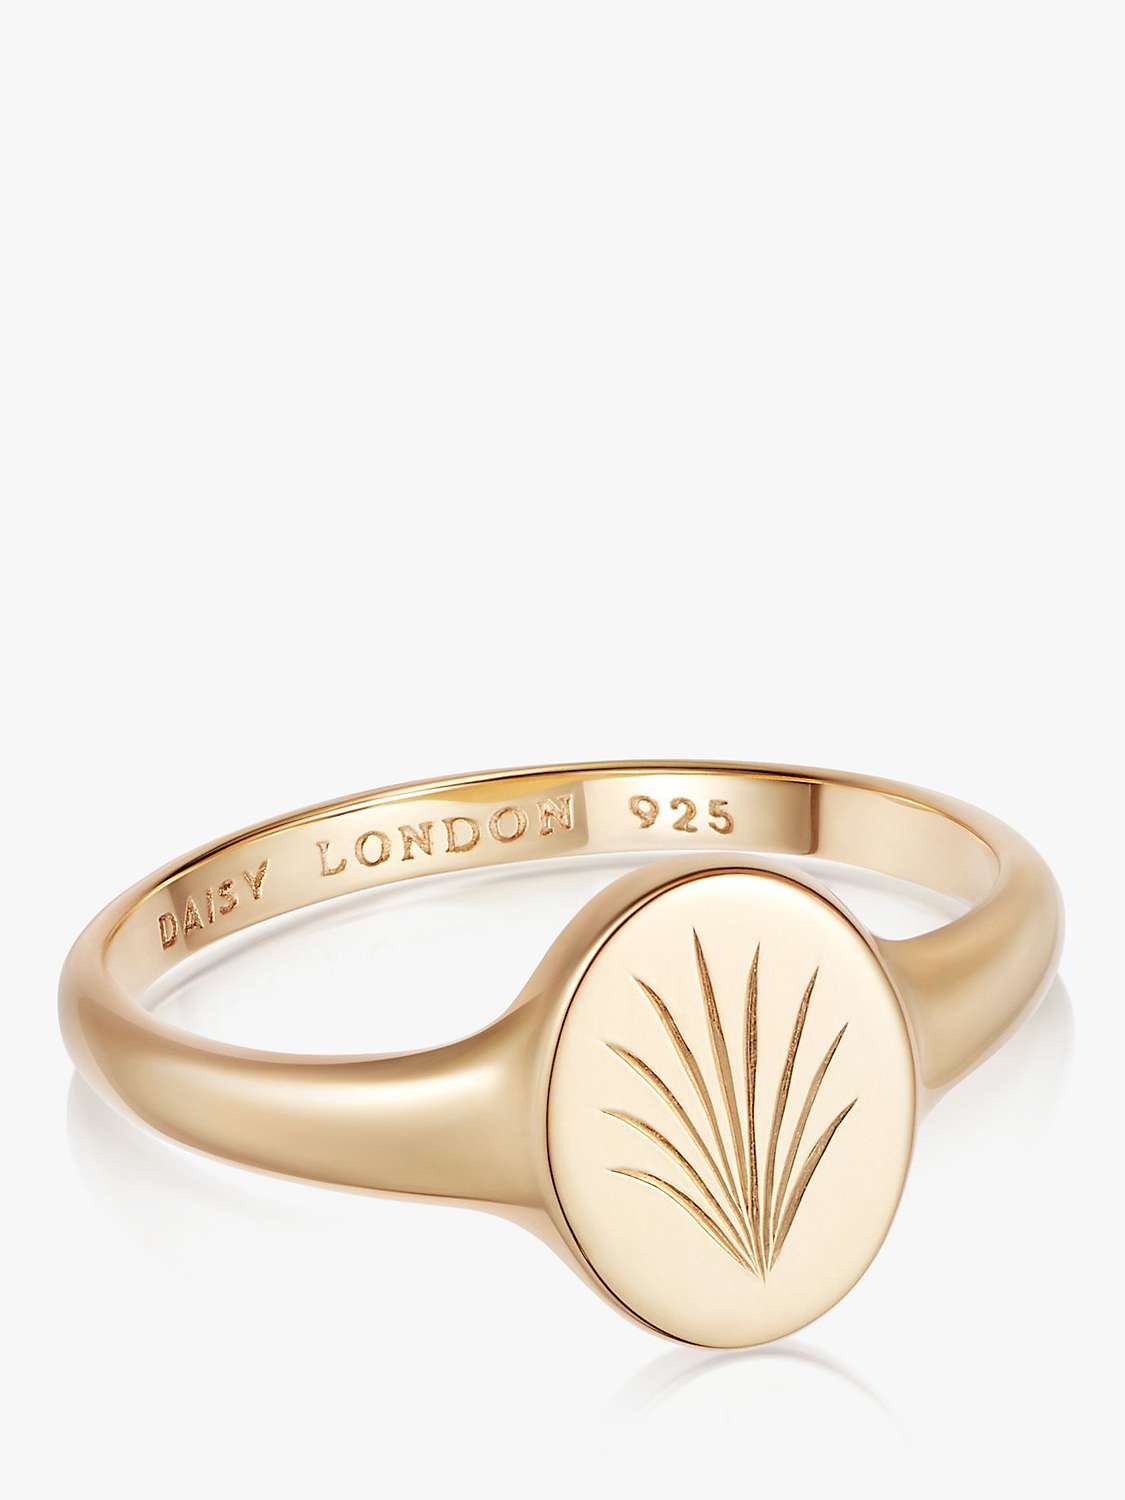 Buy Daisy London Palms Collection Signet Ring, Gold Online at johnlewis.com